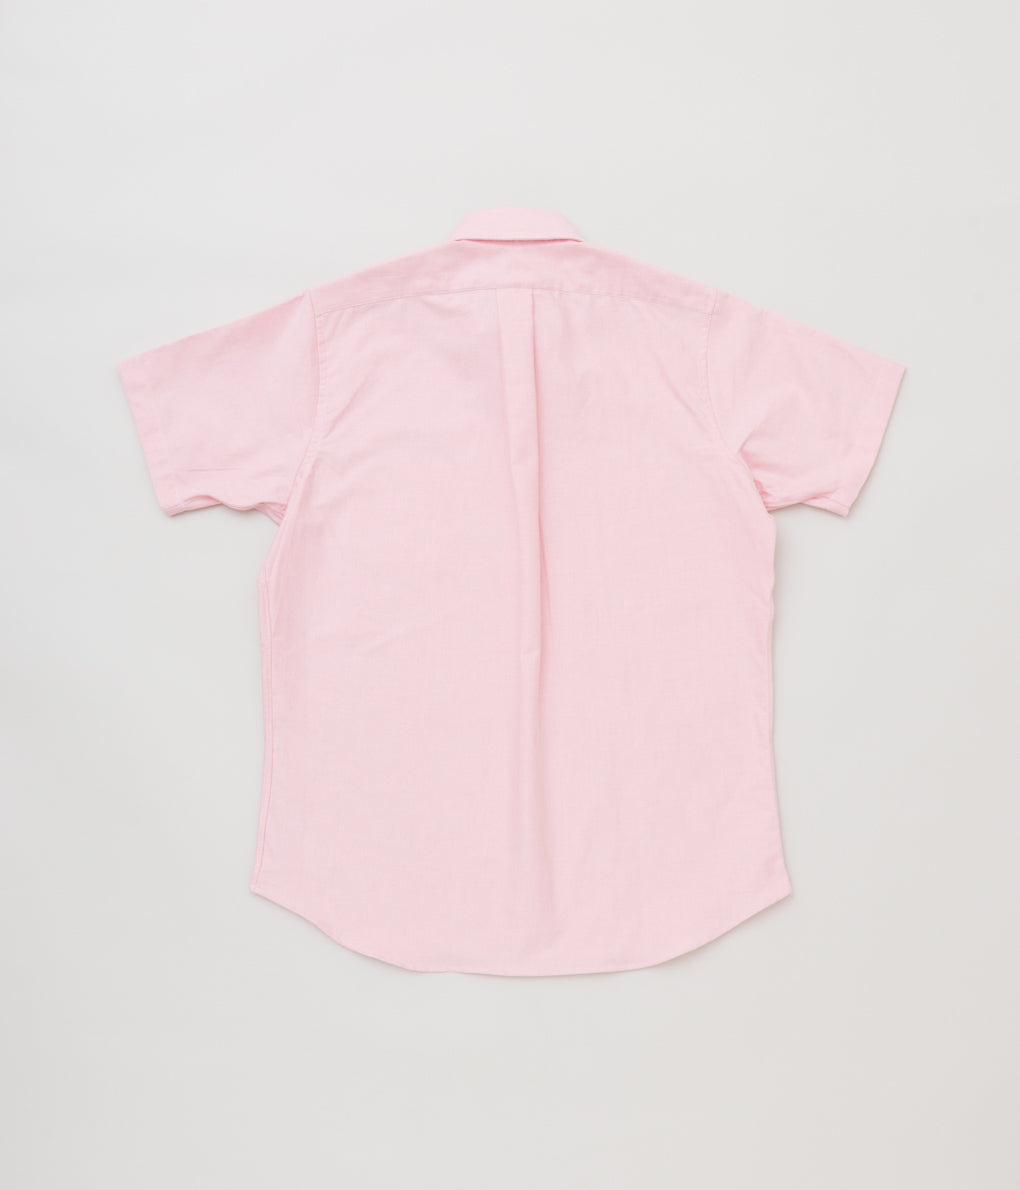 INDIVIDUALIZED SHIRTS "CAMBRIDGE OXFORD (NEW STANDARD FIT POP OVER SHORT SLEEVE SHIRT)" (PINK)